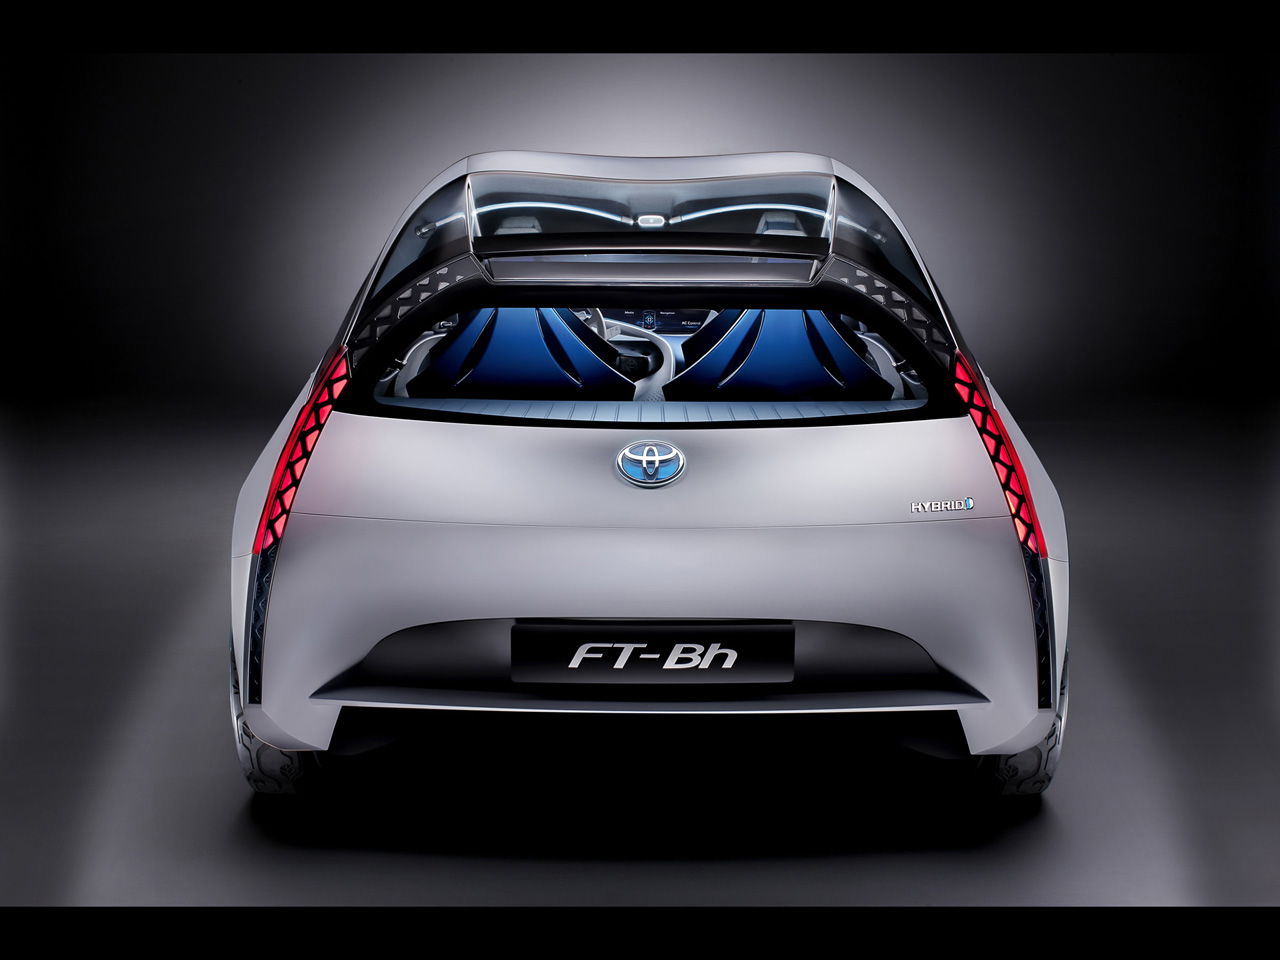 2012 Toyota FT-Bh Concept